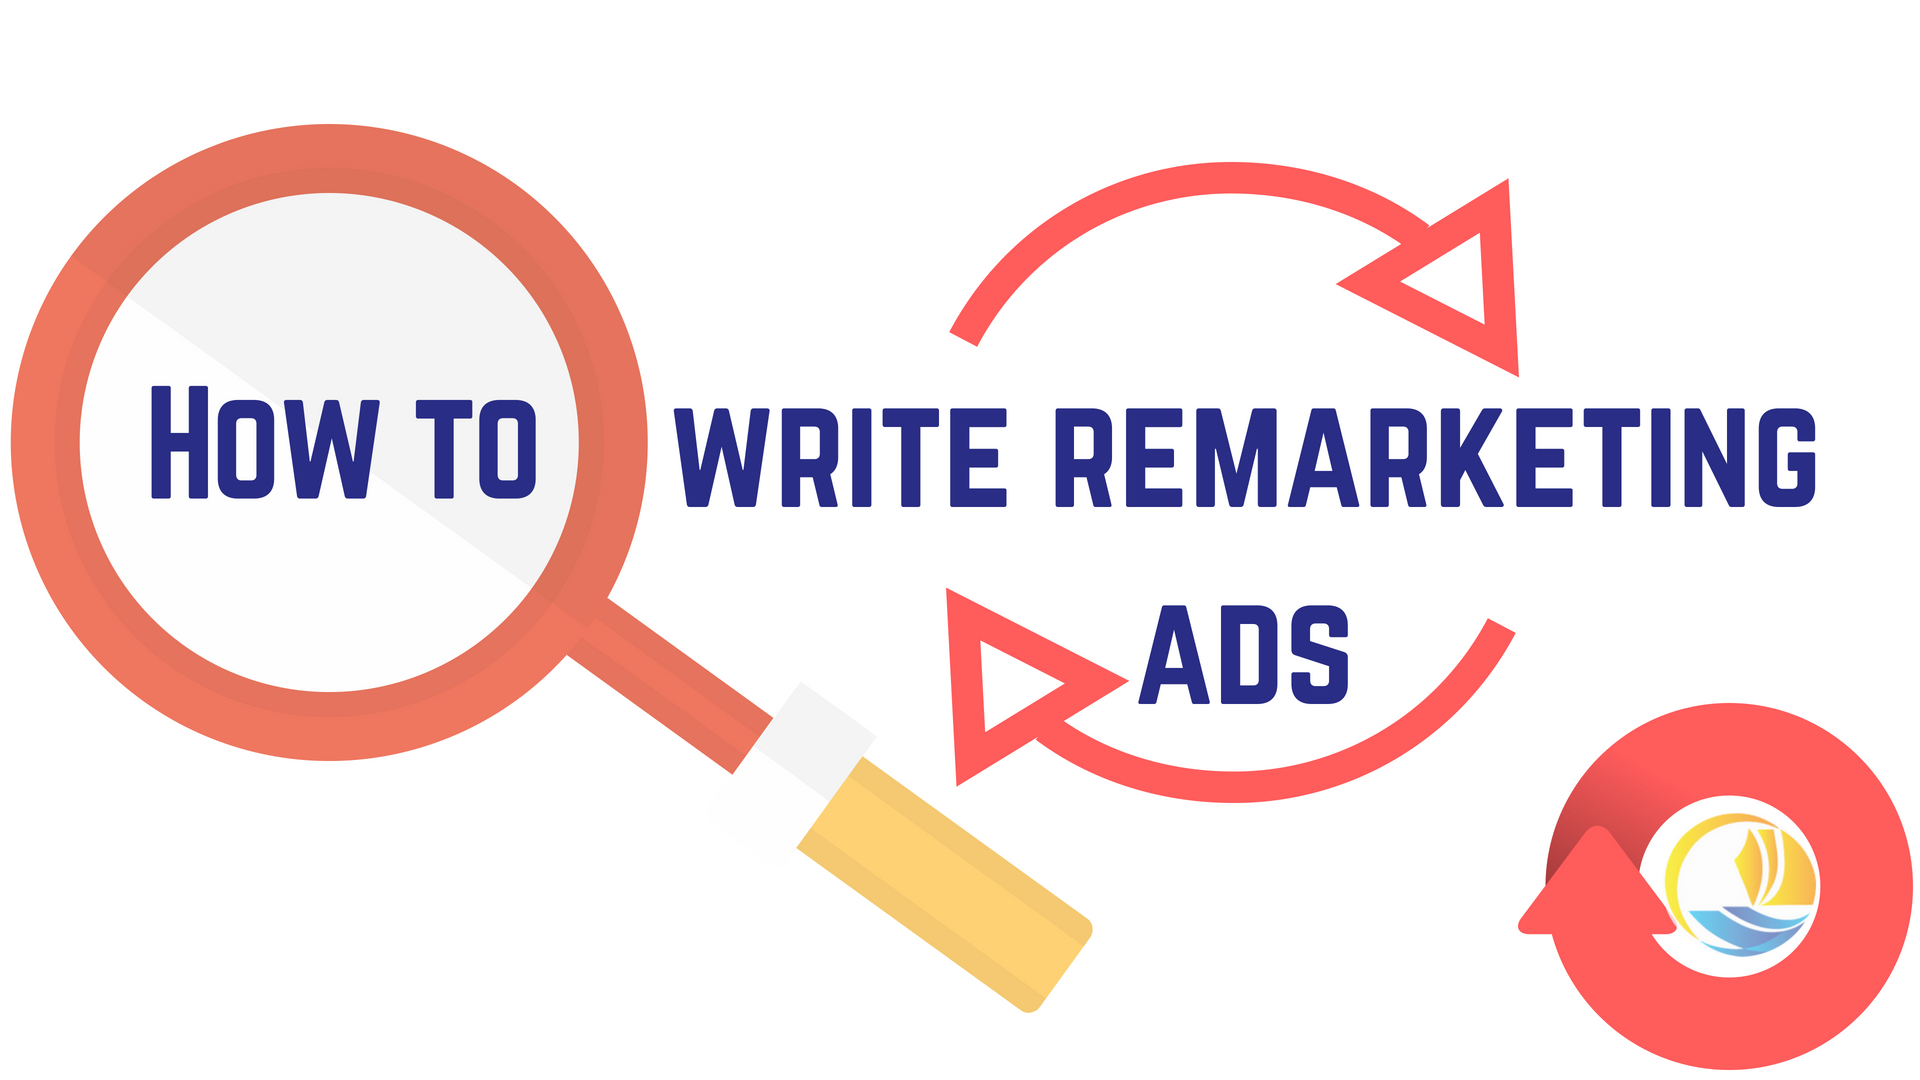 How to write remarketing ads